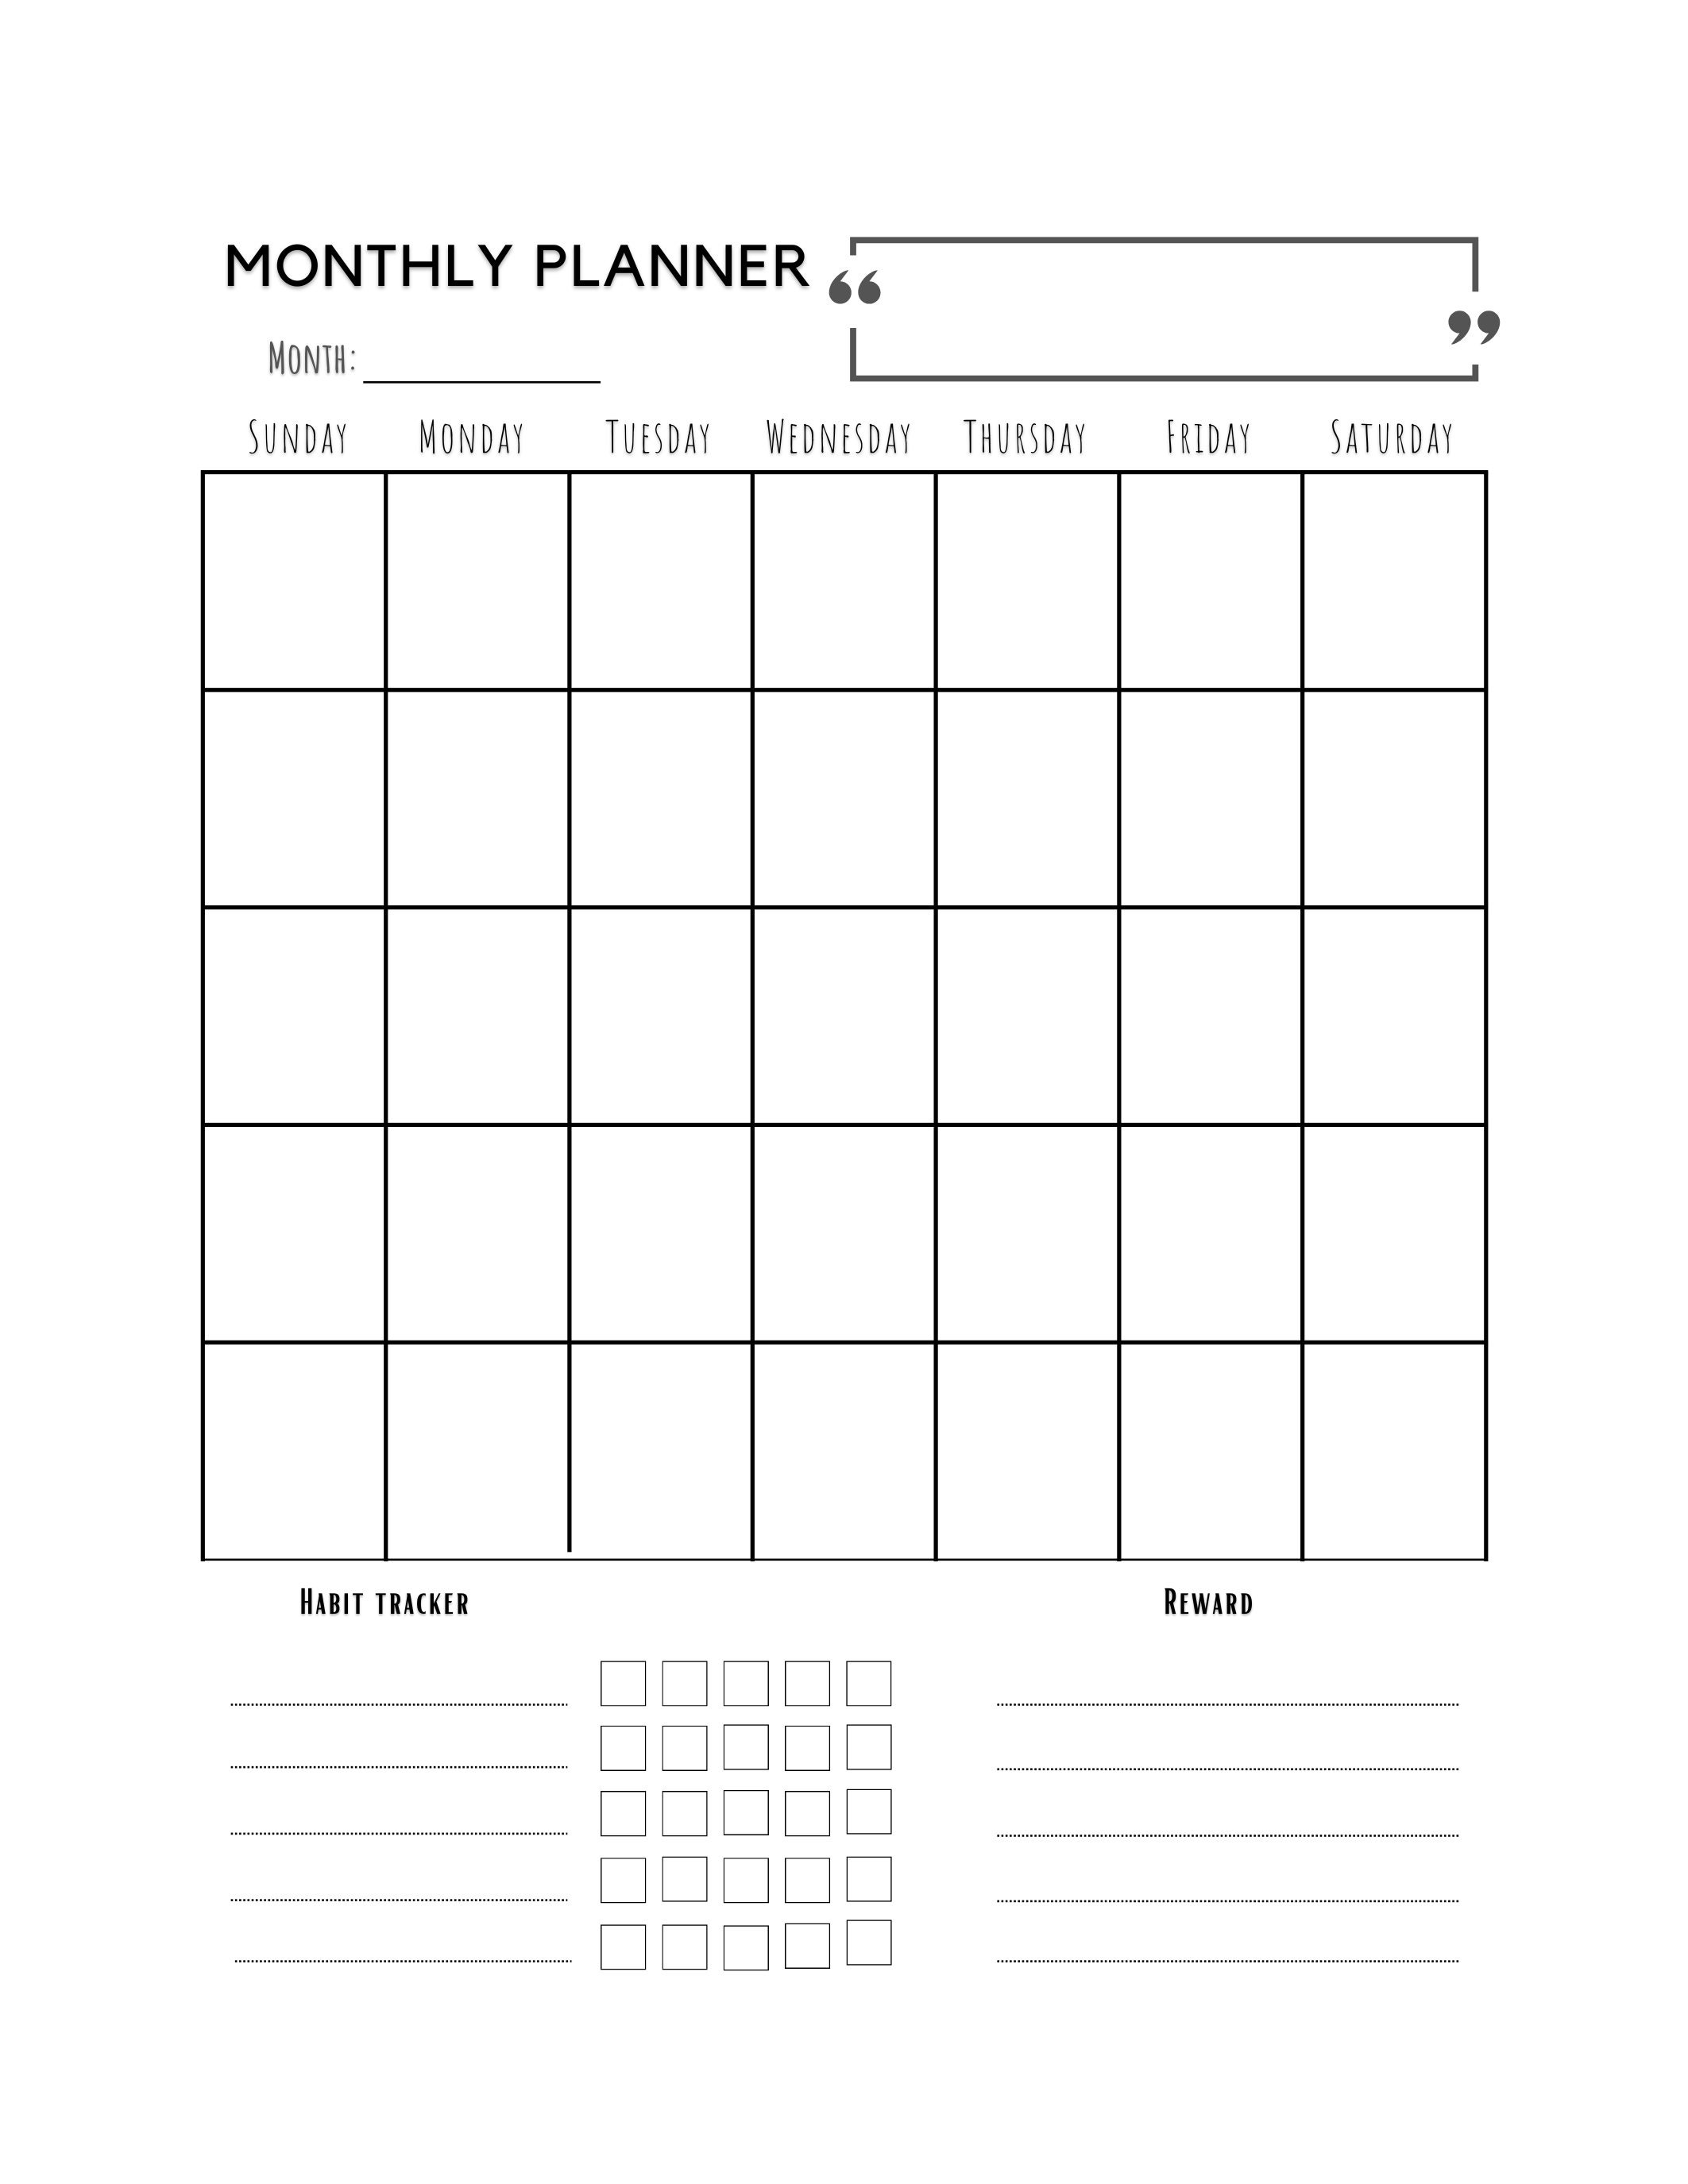 Printable Downloads Schedule Daily Planner Weekly Planner - Etsy